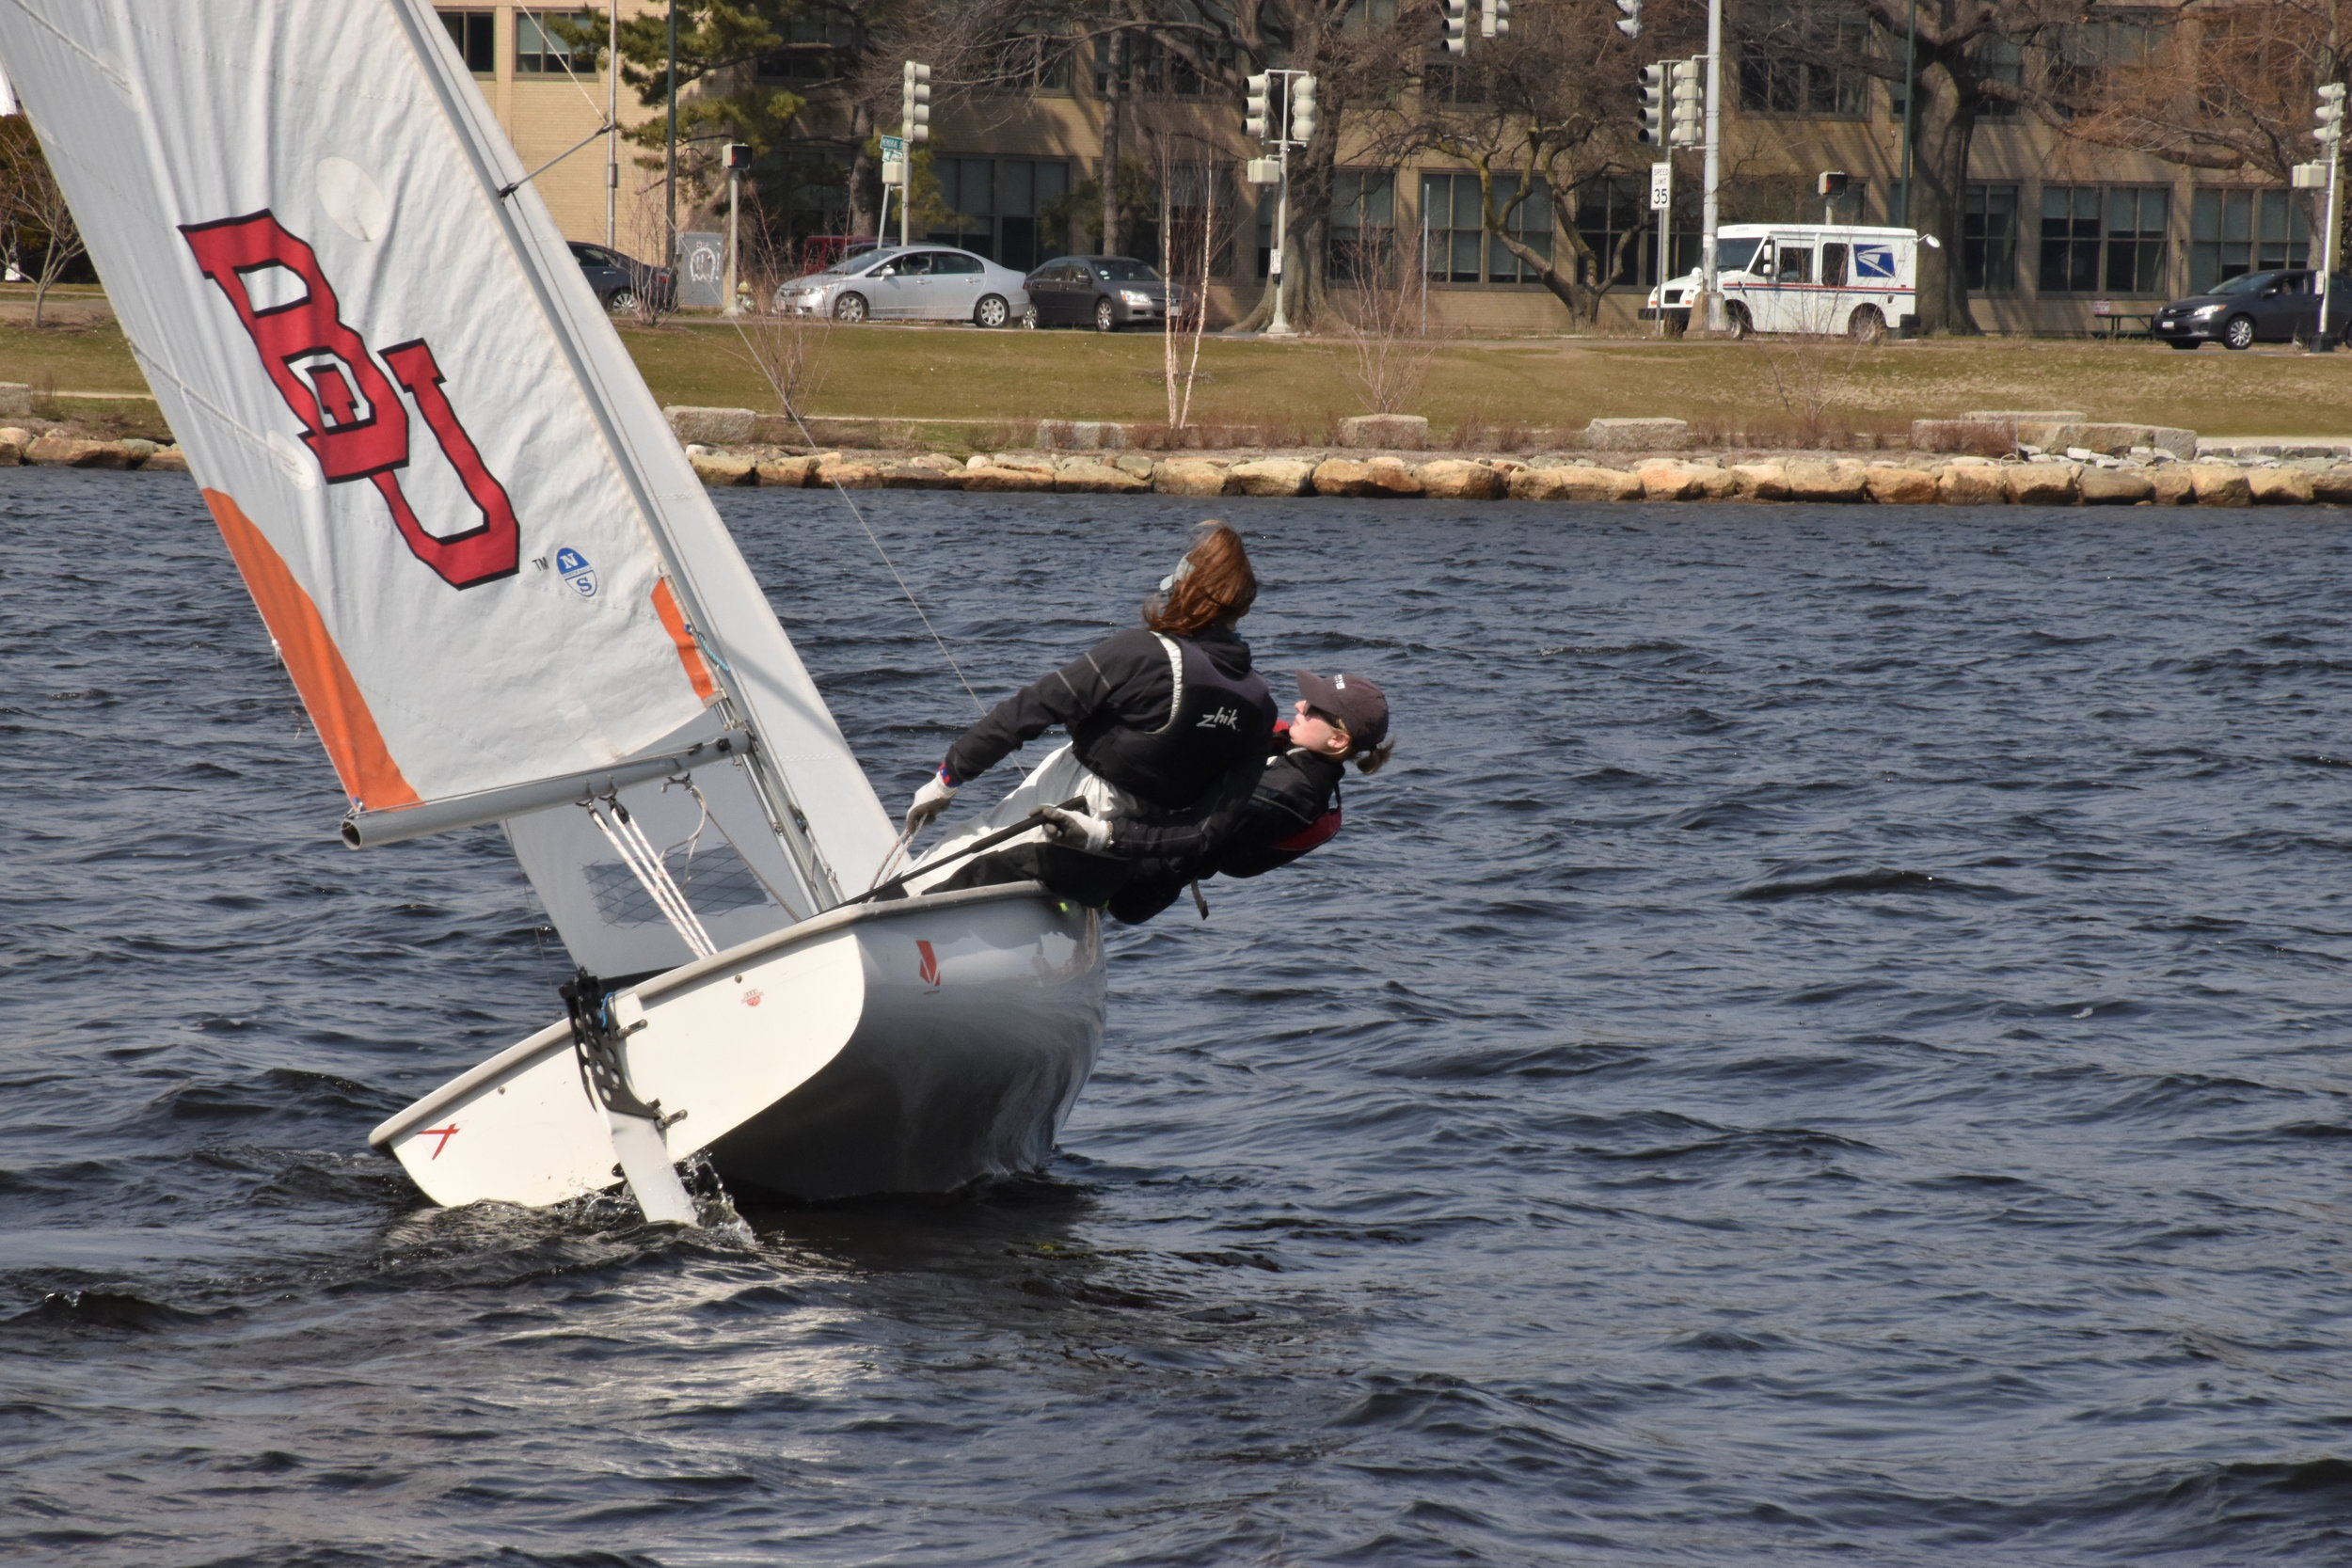 Two members of the Boston University sailing team practice on the Charles River